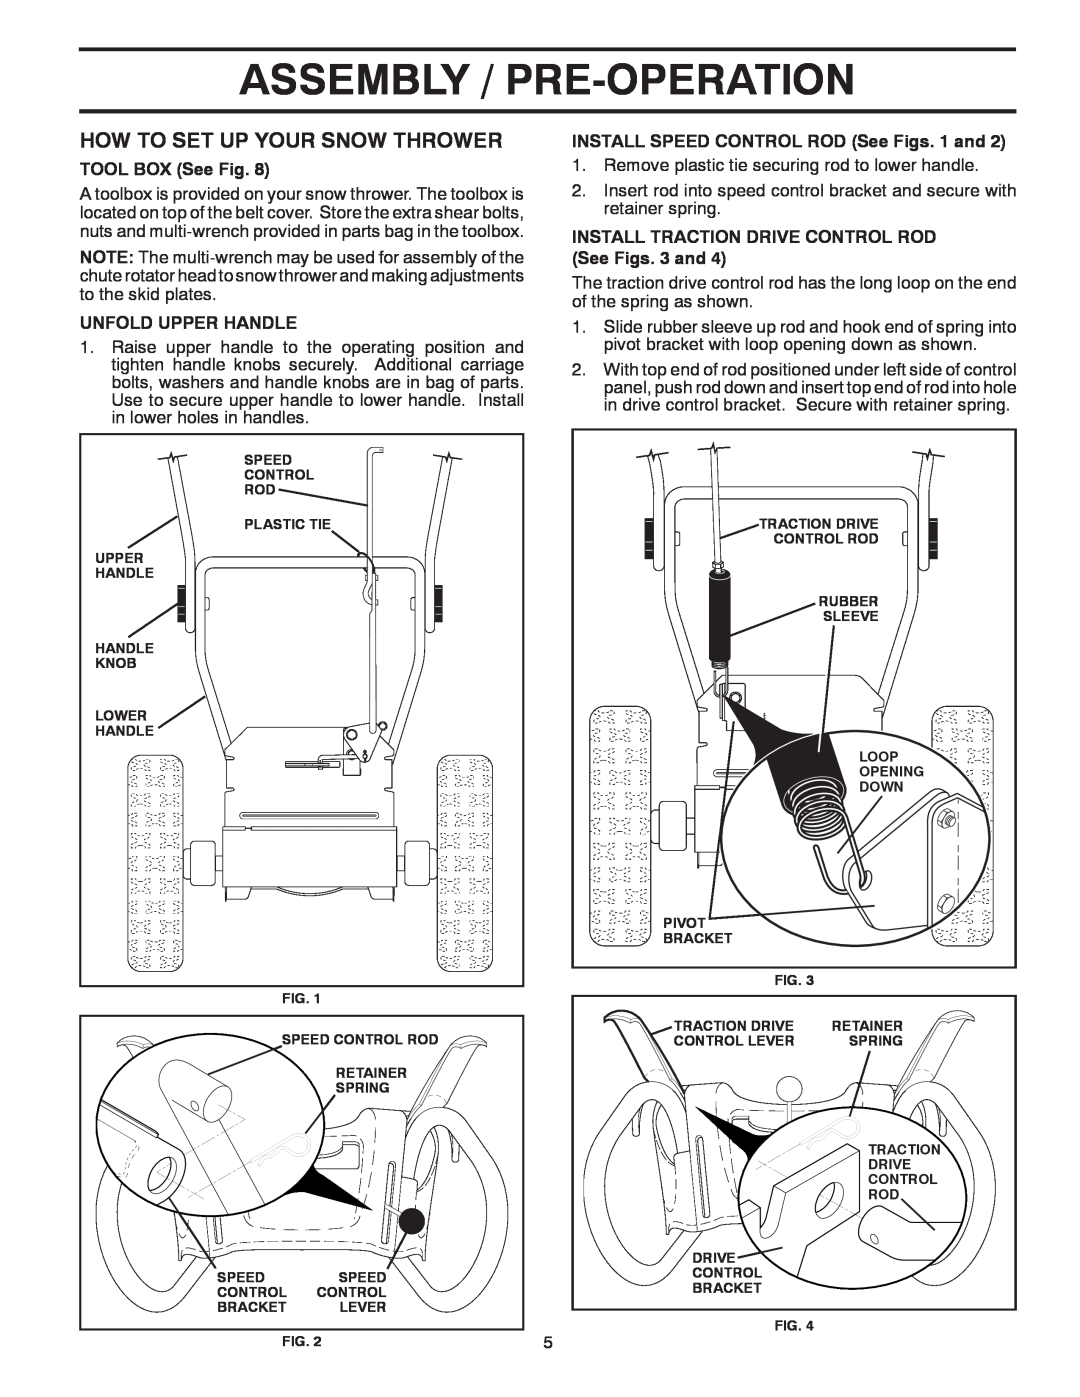 Poulan 96194000503 How To Set Up Your Snow Thrower, Assembly / Pre-Operation, TOOL BOX See Fig, Unfold Upper Handle 